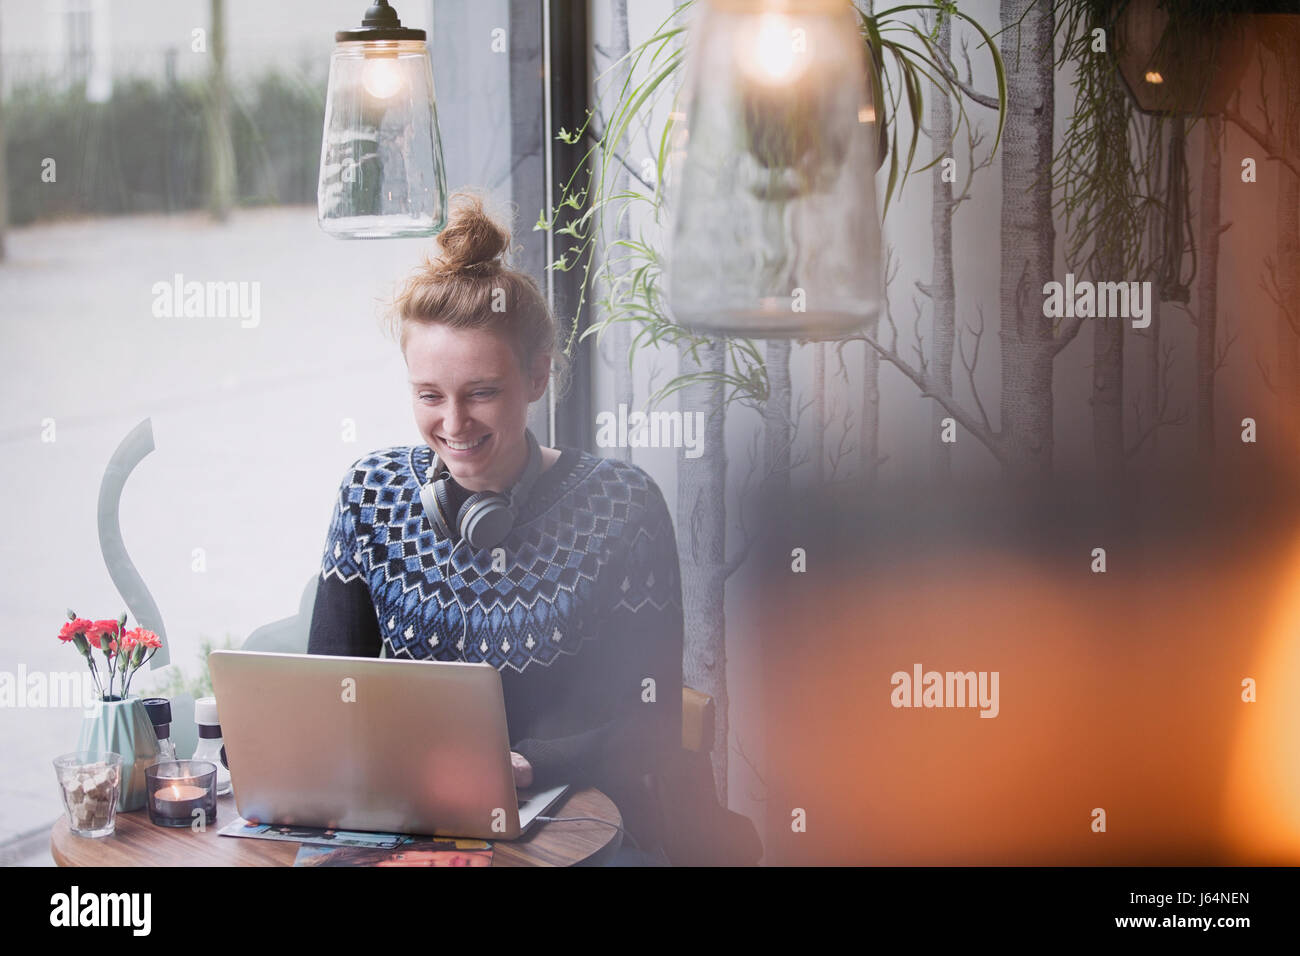 Smiling young woman using laptop in cafe window Stock Photo